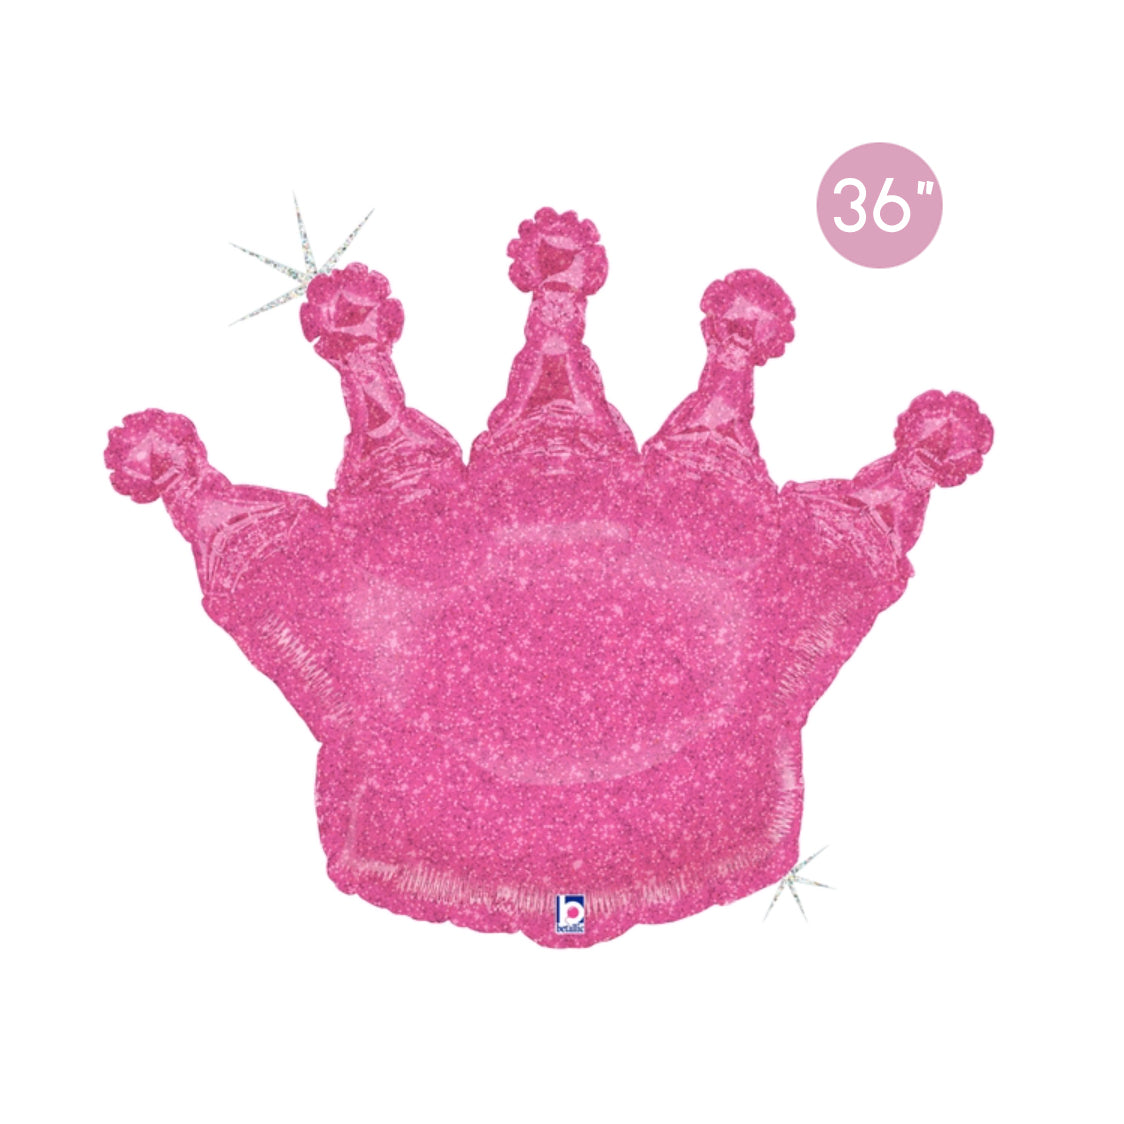 36-inch Pink Glittered Crown Foil Balloon